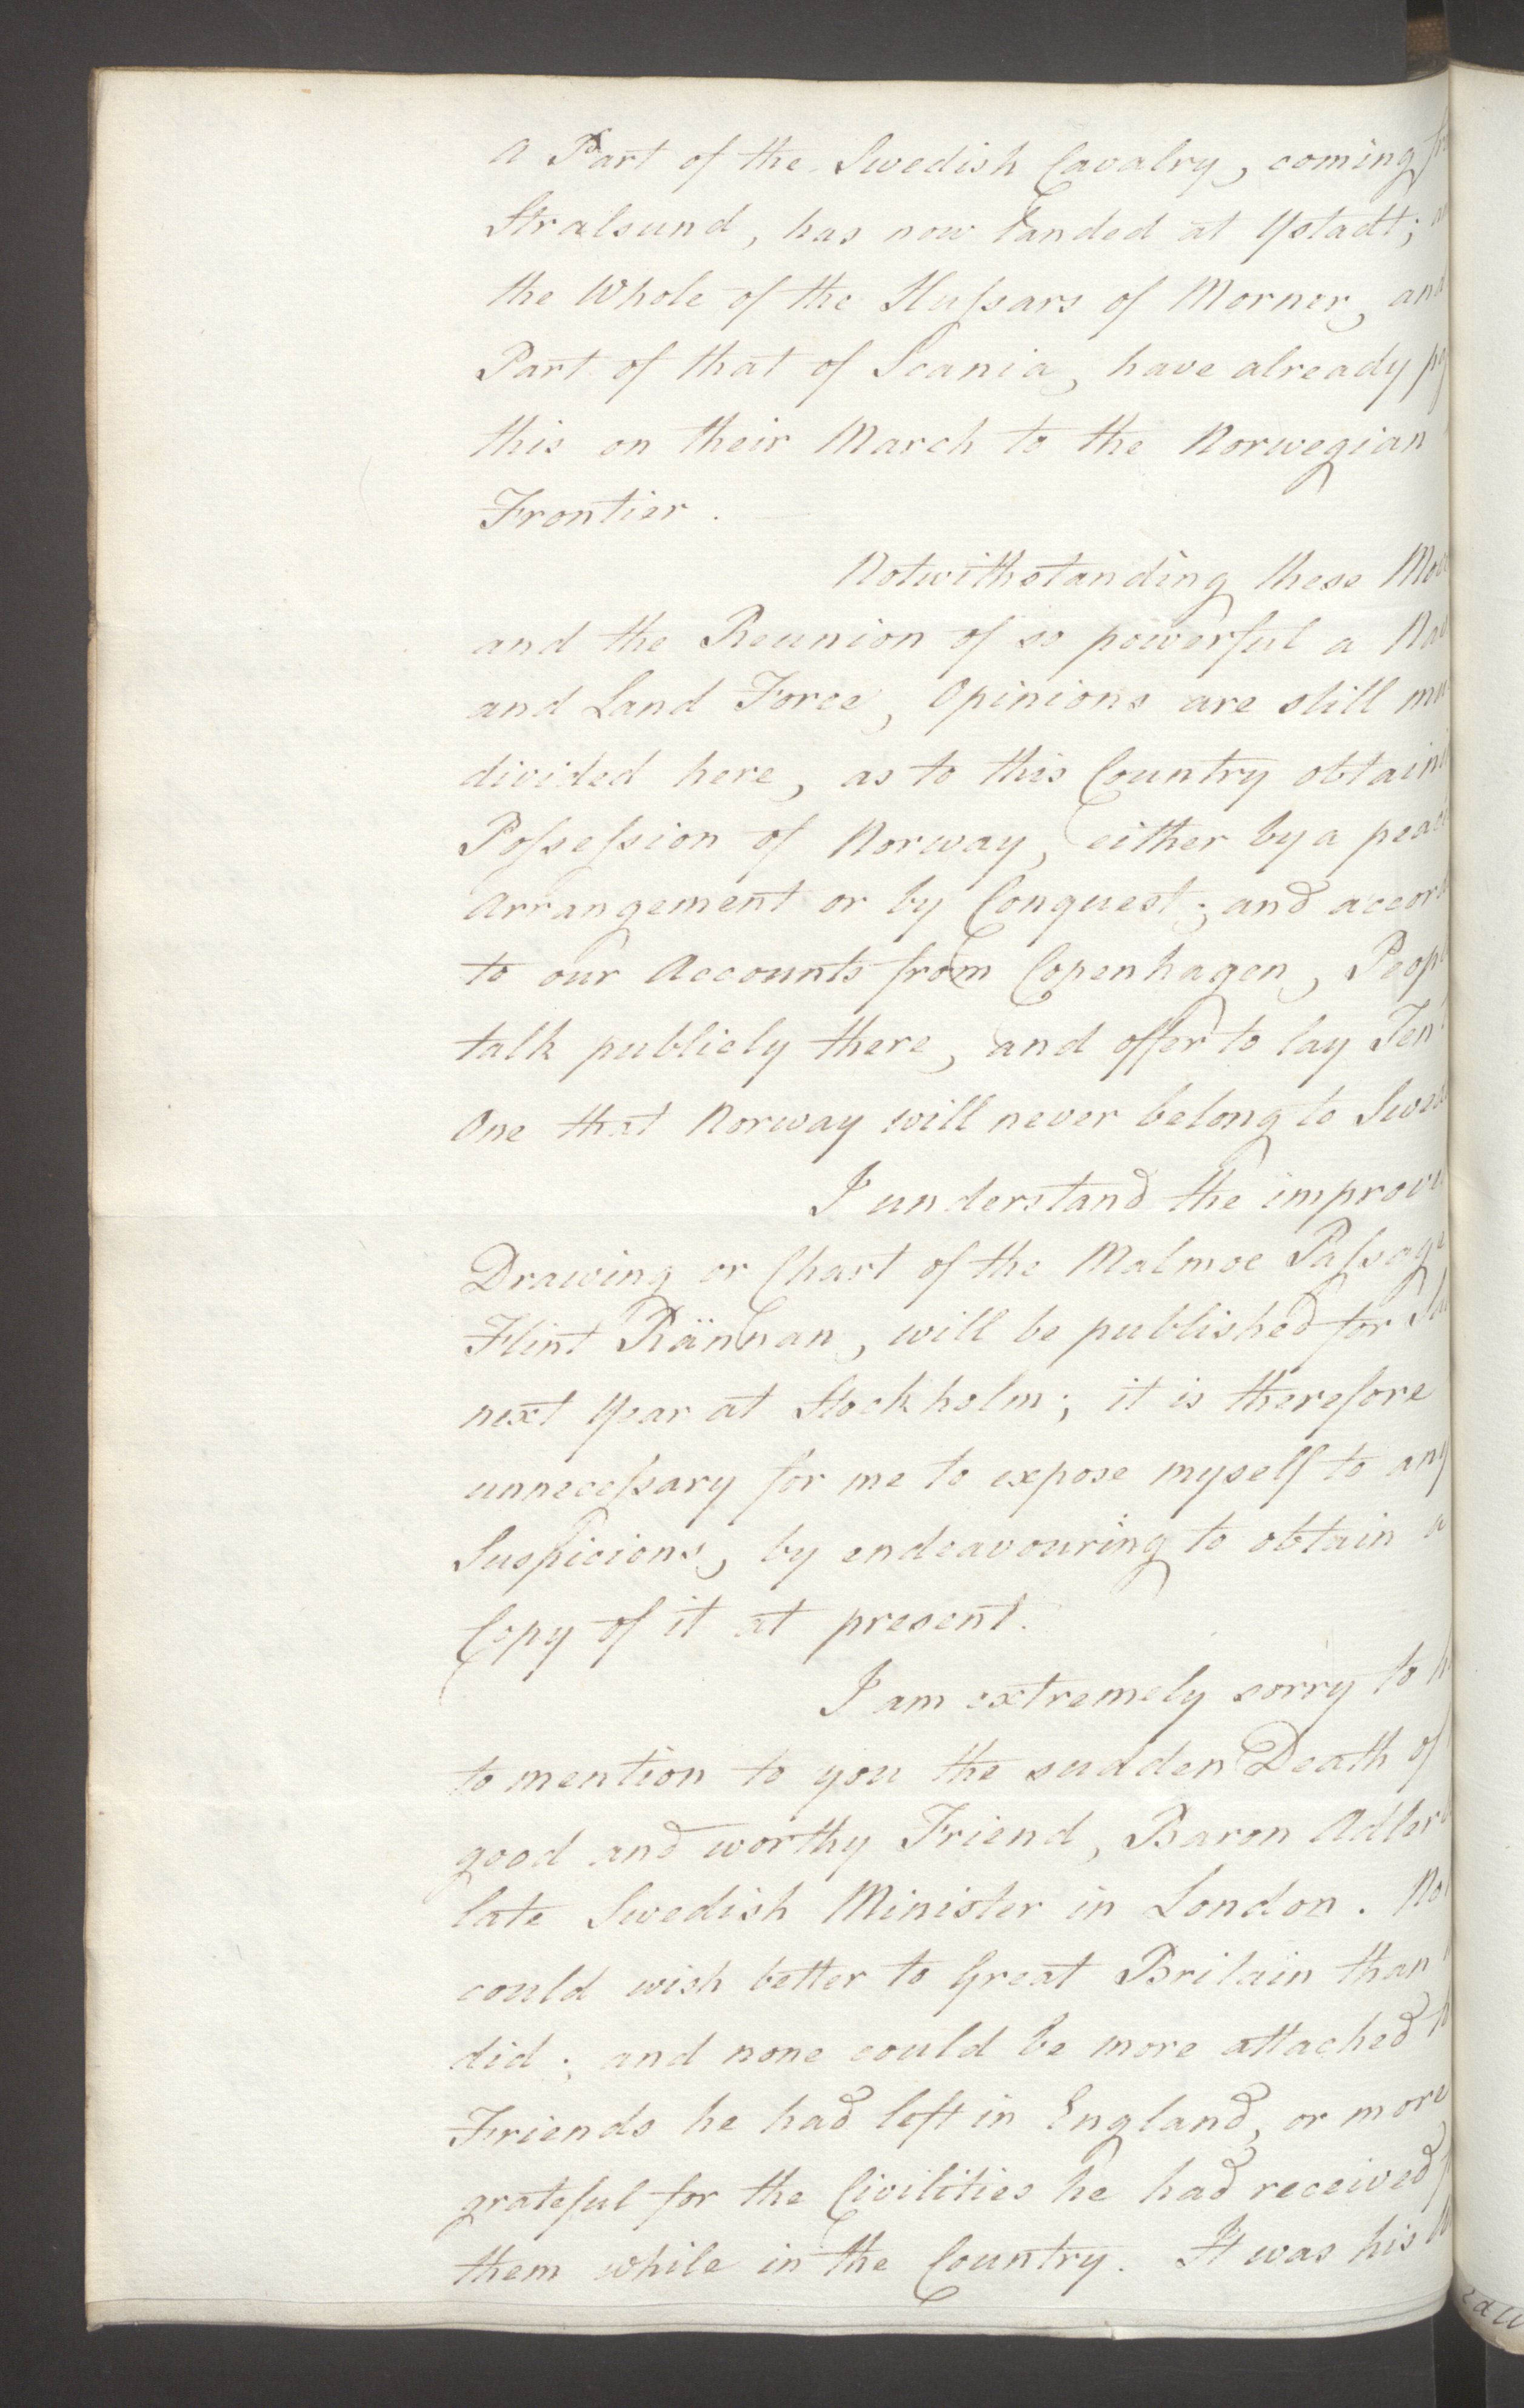 Foreign Office*, UKA/-/FO 38/16: Sir C. Gordon. Reports from Malmö, Jonkoping, and Helsingborg, 1814, s. 72